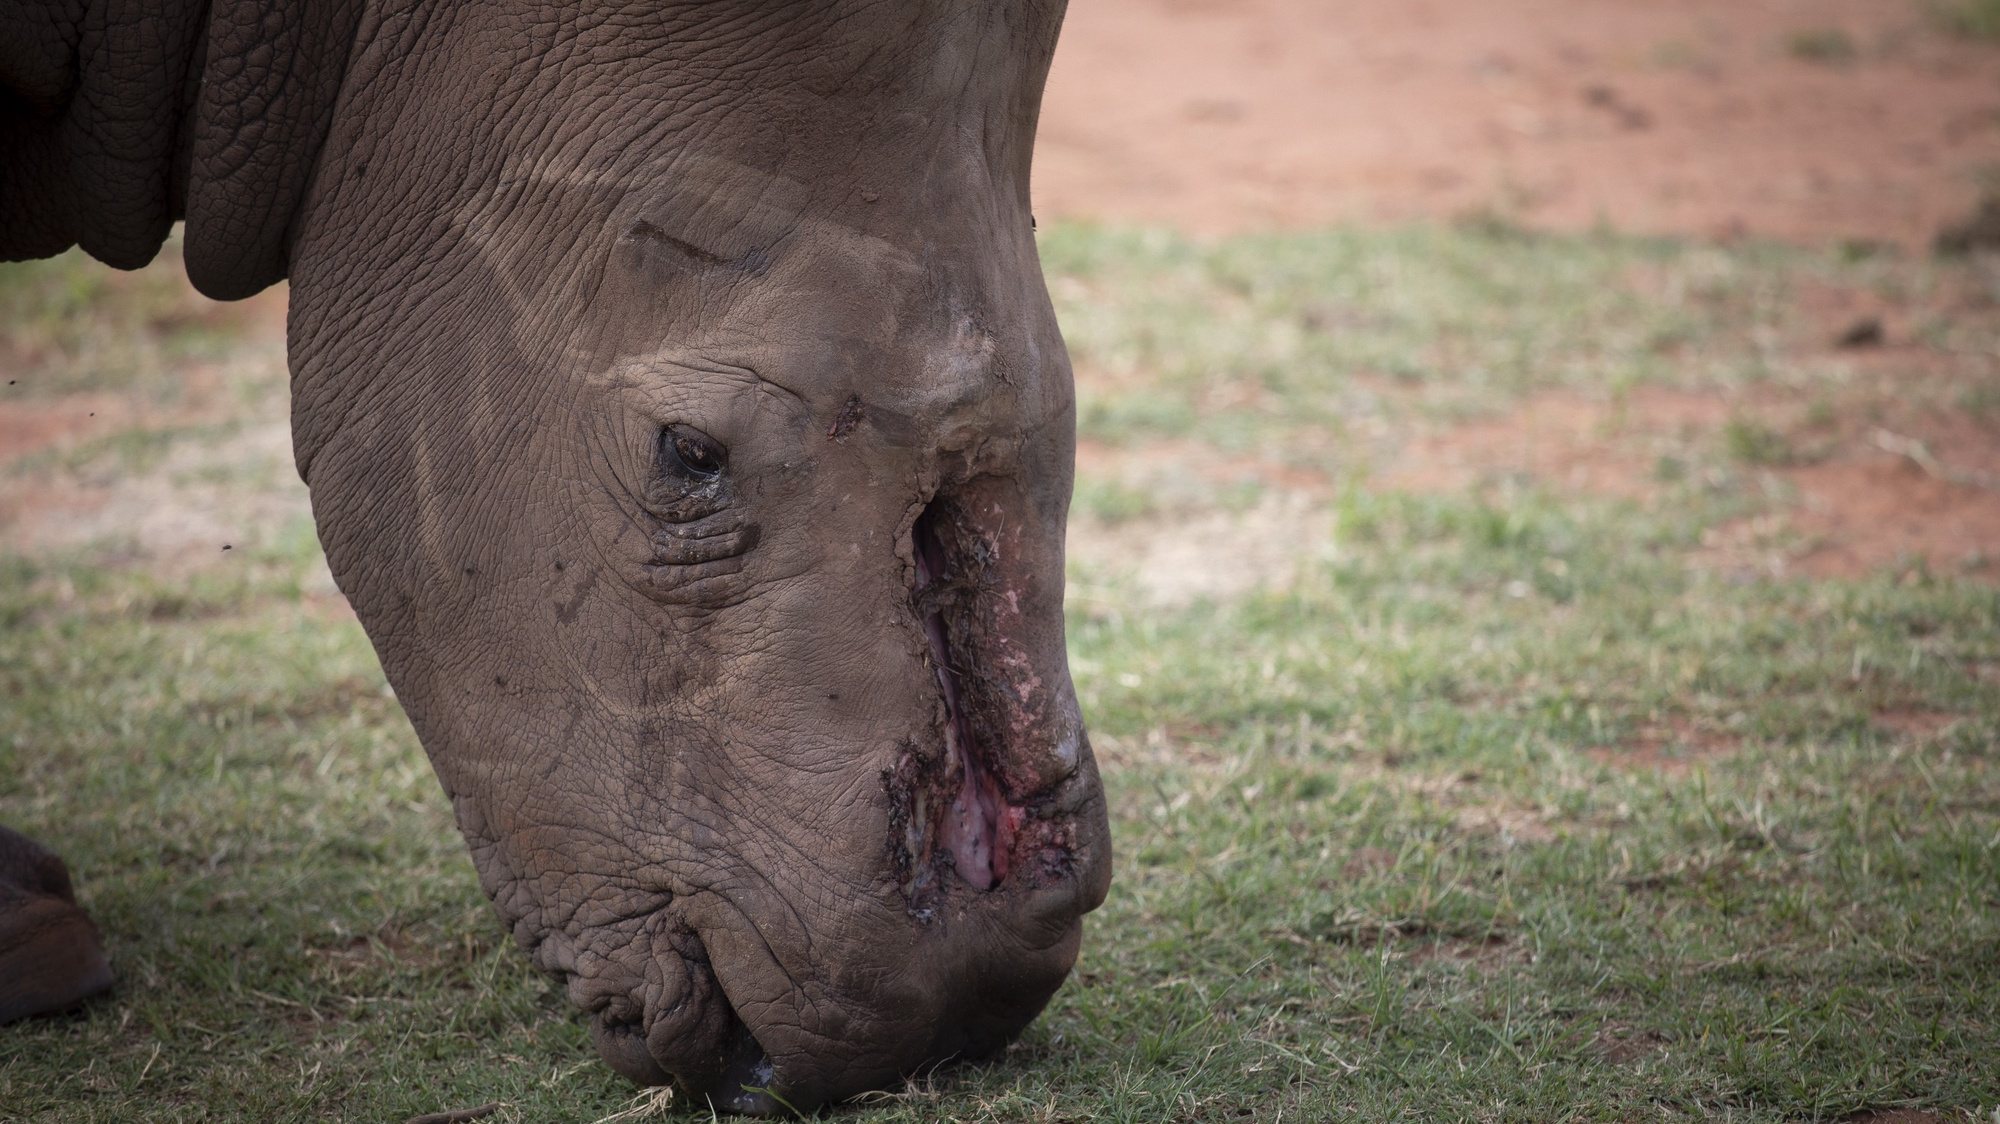 epa09706052 White Rhino bull &#039;Seha&#039; showing serious facial damage done to his face grazes in Bela Bela, South Africa, 24 January 2022, prior to his relocation to another nearby game reserve after recovering from serious facial wounds sustained when his horn was hacked off by poachers. Seha is the only survivor from a group of five rhinos that were poached on a game farm six years ago and has had 30 operations to the deep wounds on his face since then. South Africa has the world&#039;s largest population of rhinos in the world. However over the past years hundreds of the animals have been killed by poachers seeking their horns for sale to the lucrative traditional healing market in the Far East. In a ground-breaking and world-leading initiative, Dr. Johan Marias from &#039;Saving the Survivors&#039; races to injured and poached rhinos once they have been called by conservation groups or private rhino owners in an attempt to save the animals and heal their often horrifying open wounds. Seha will be released onto a new game ranch with two female rhinos in hope for them to breed and help maintain the rhino populations.  EPA/KIM LUDBROOK